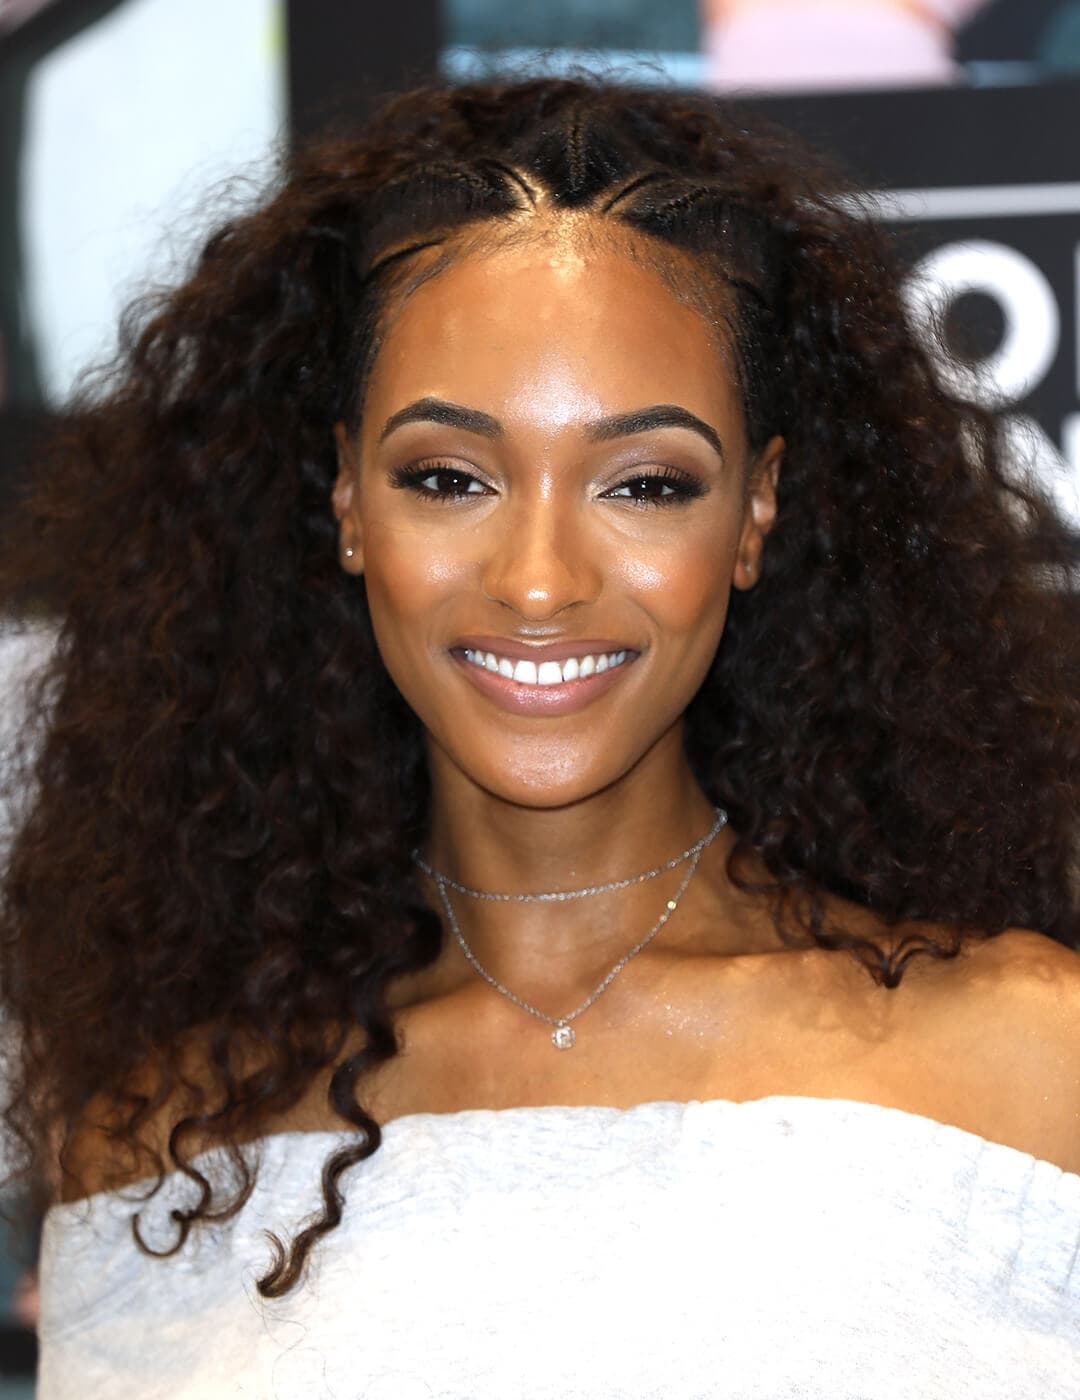 Jourdan Dunn looking chic in a white dress and Albasso Braids hairstyle